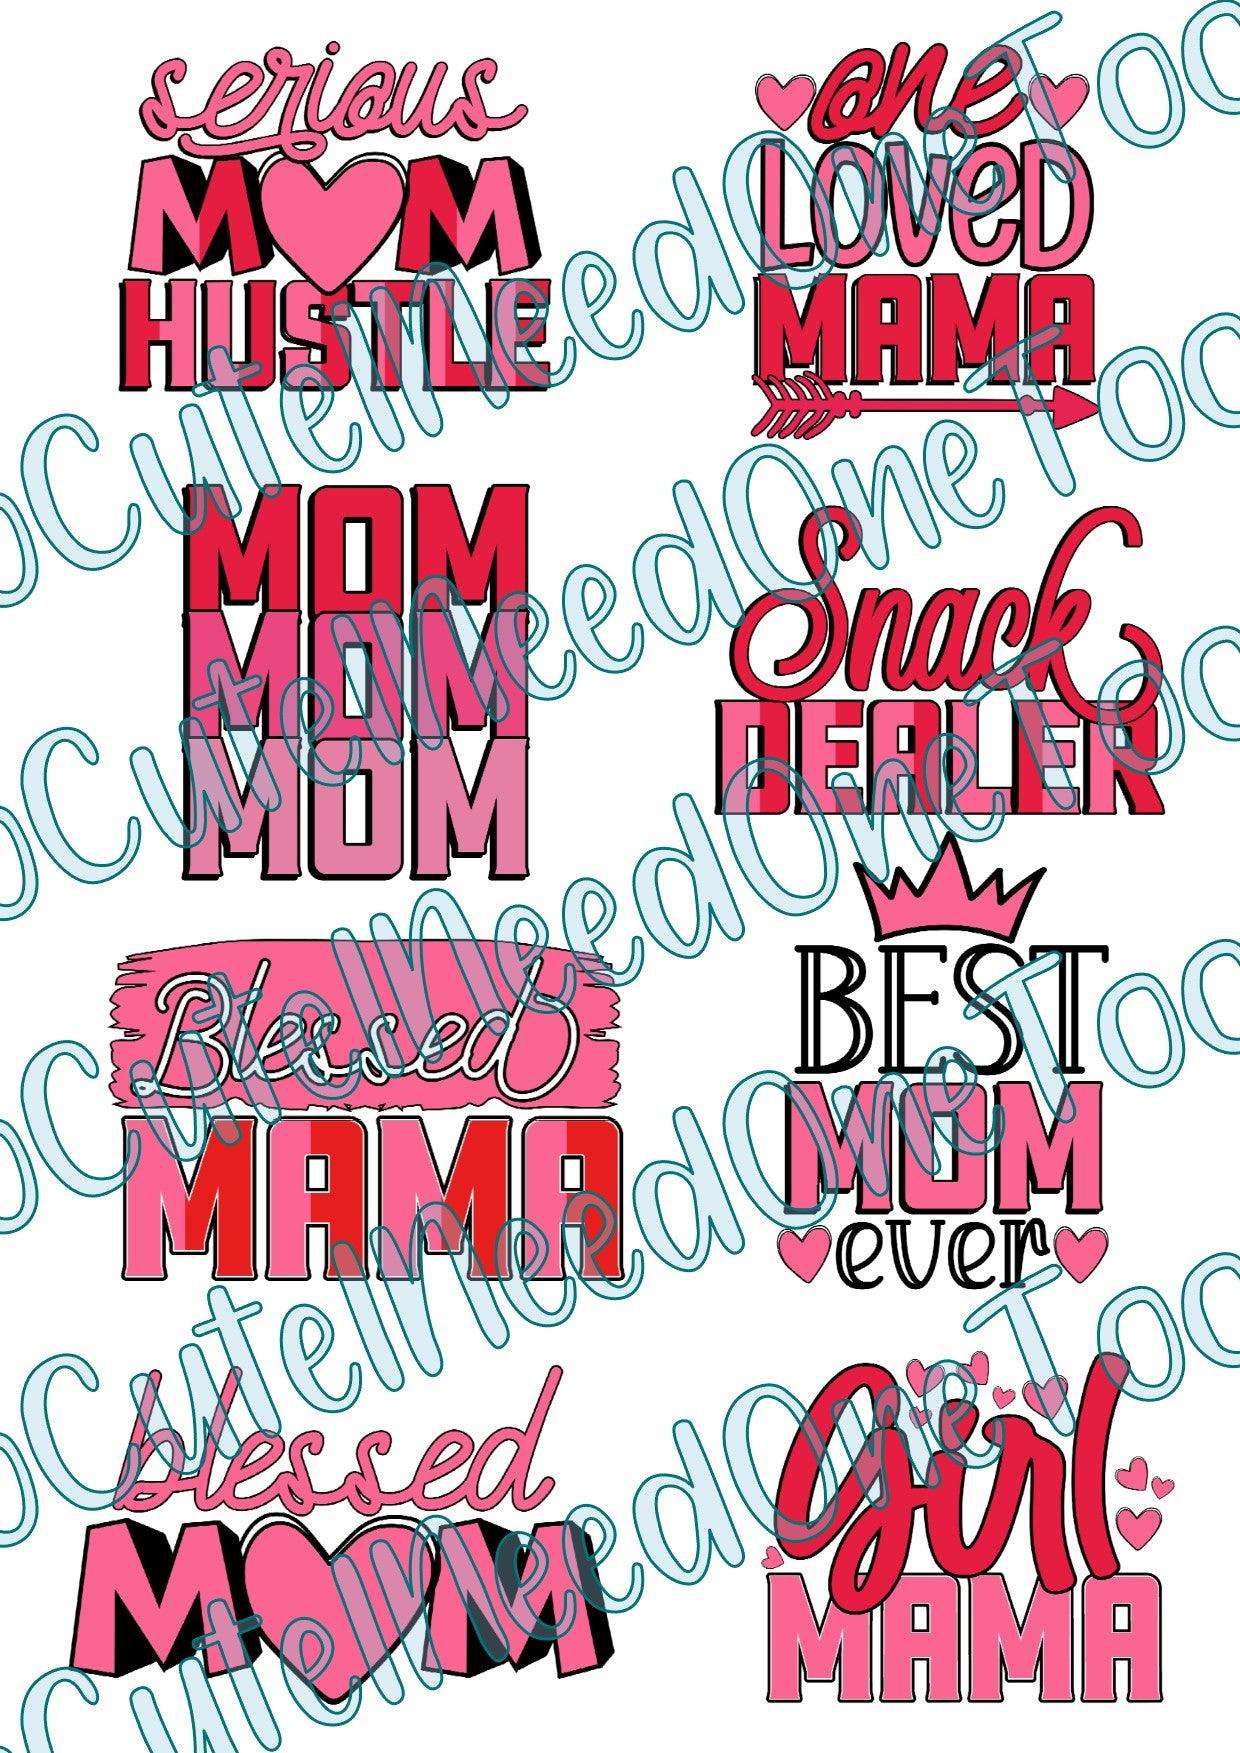 Mom Hustle on Clear/White Waterslide Paper Ready To Use - SoCuteINeedOneToo